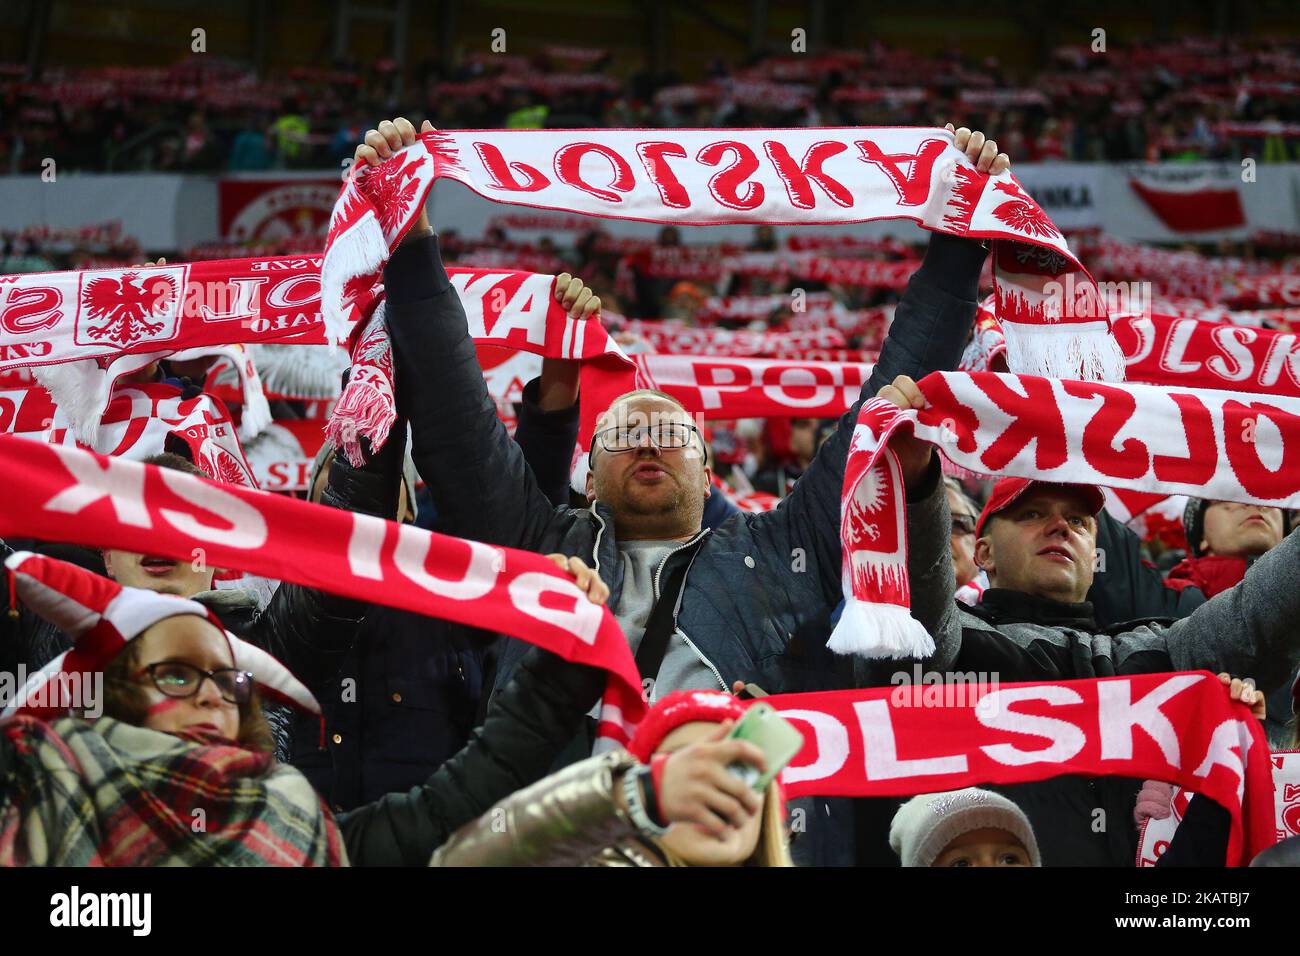 Fans during the international friendly soccer match between Poland and Mexico at the Energa Stadium in Gdansk, Poland on 13 November 2017 (Photo by Mateusz Wlodarczyk/NurPhoto) Stock Photo